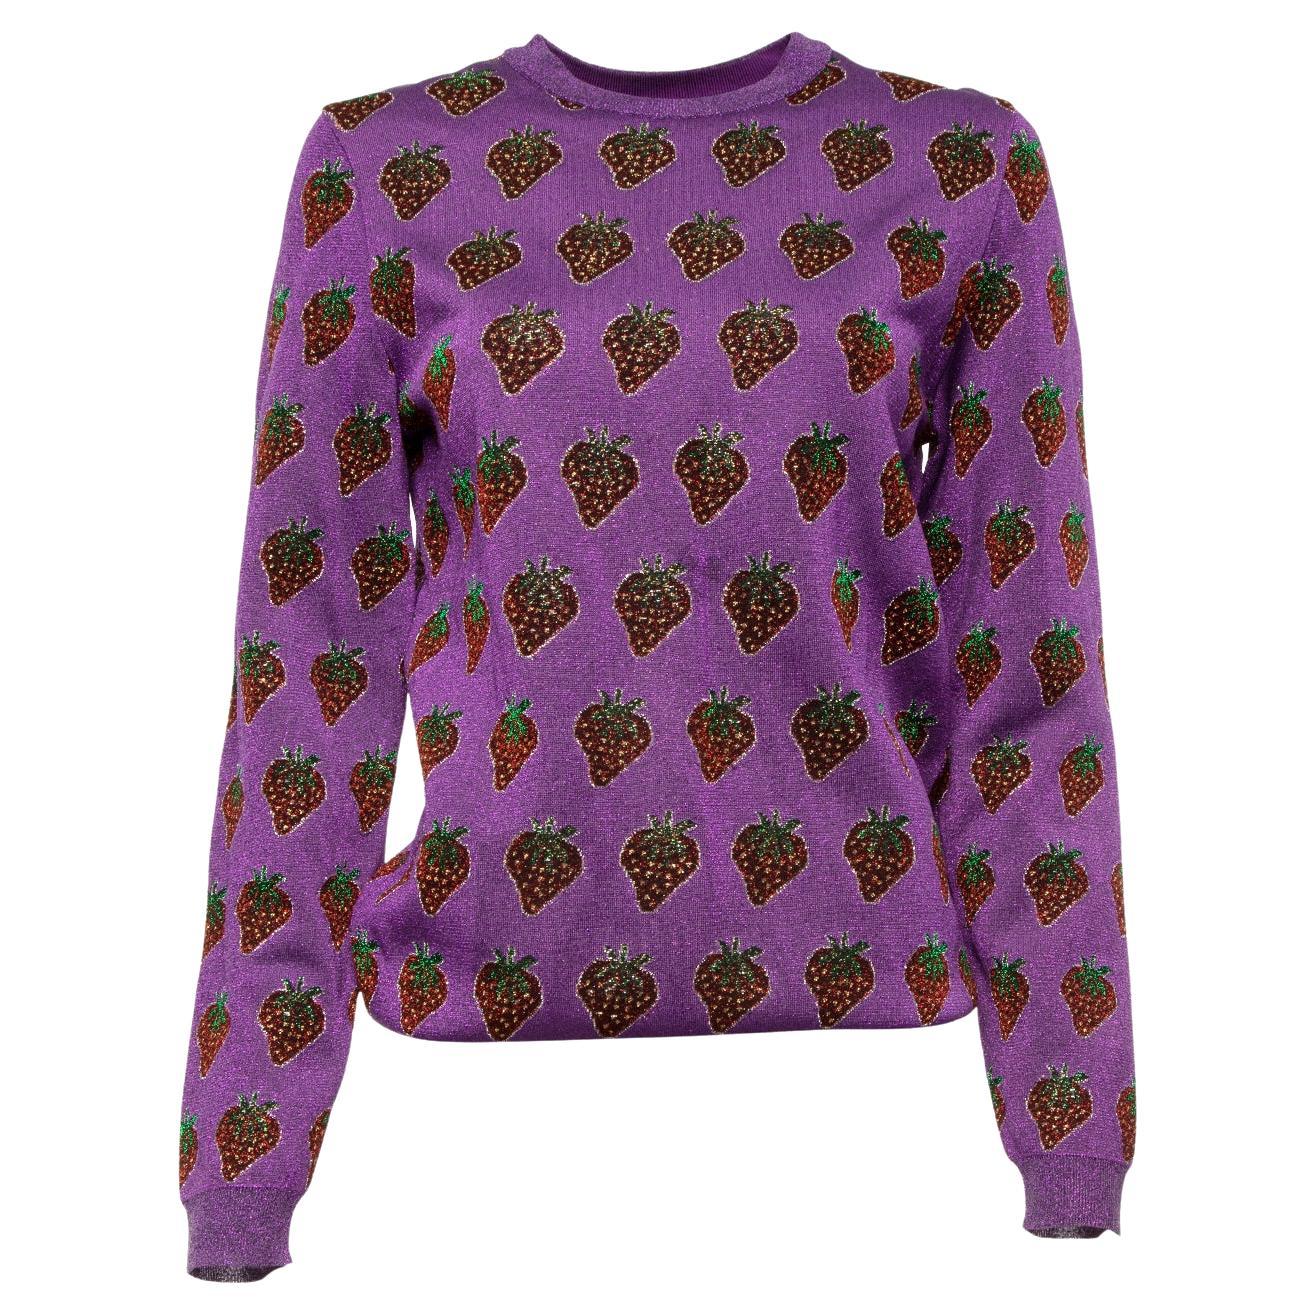 Pre-Loved Gucci Women's Strawberry Print Sweater For Sale at 1stDibs